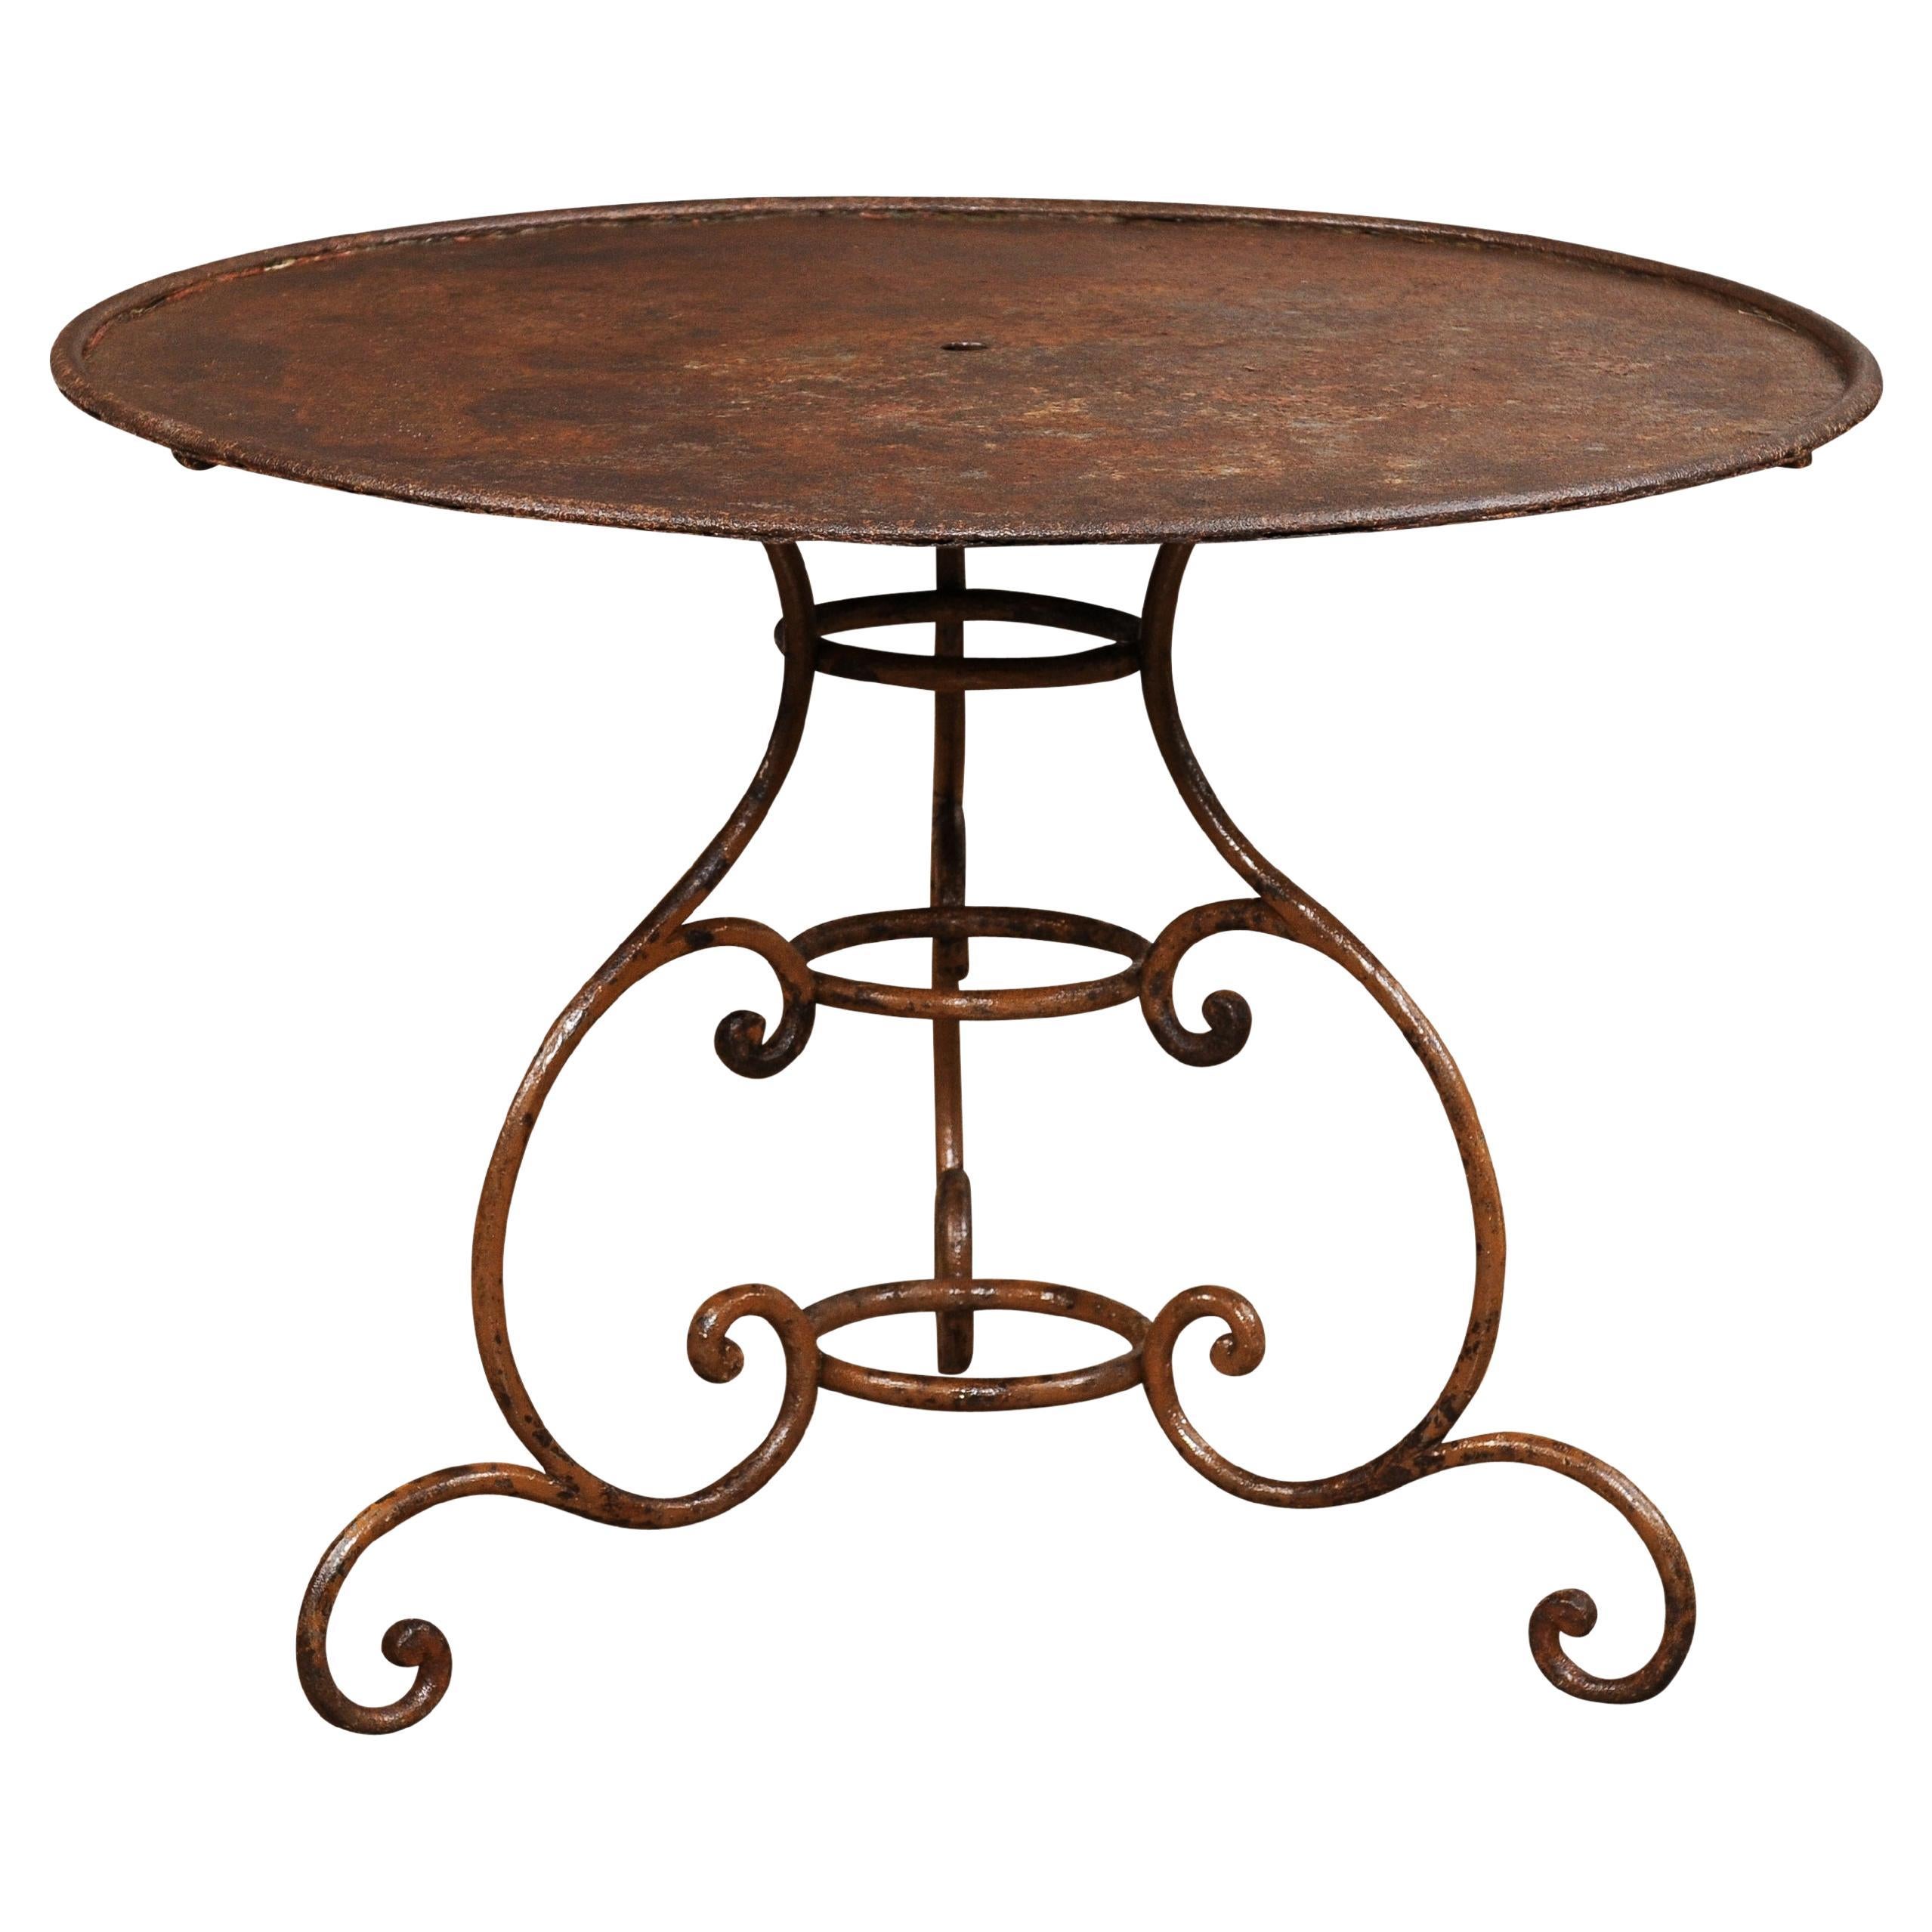 French 19th Century Round Iron Garden Table with Scrolling Base and Rusty Finish For Sale